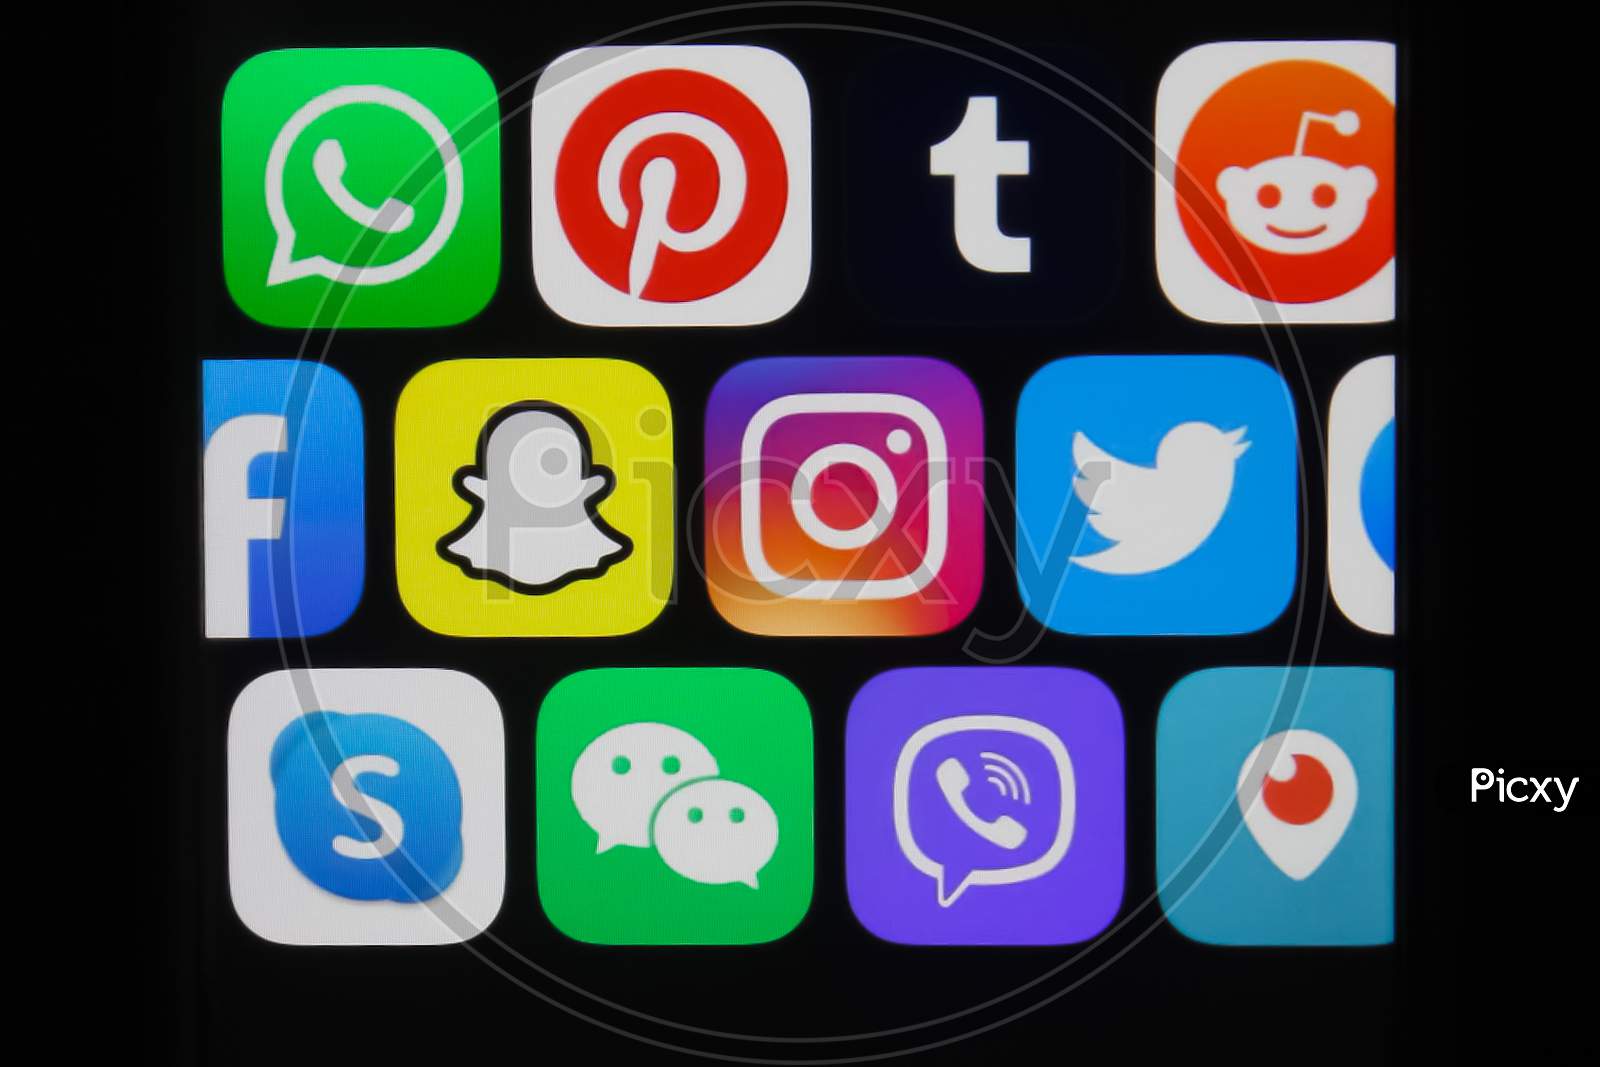 All Social media applications like Skype, WhatsApp ,Facebook, Instagram, Twitter, Facebook at one place.